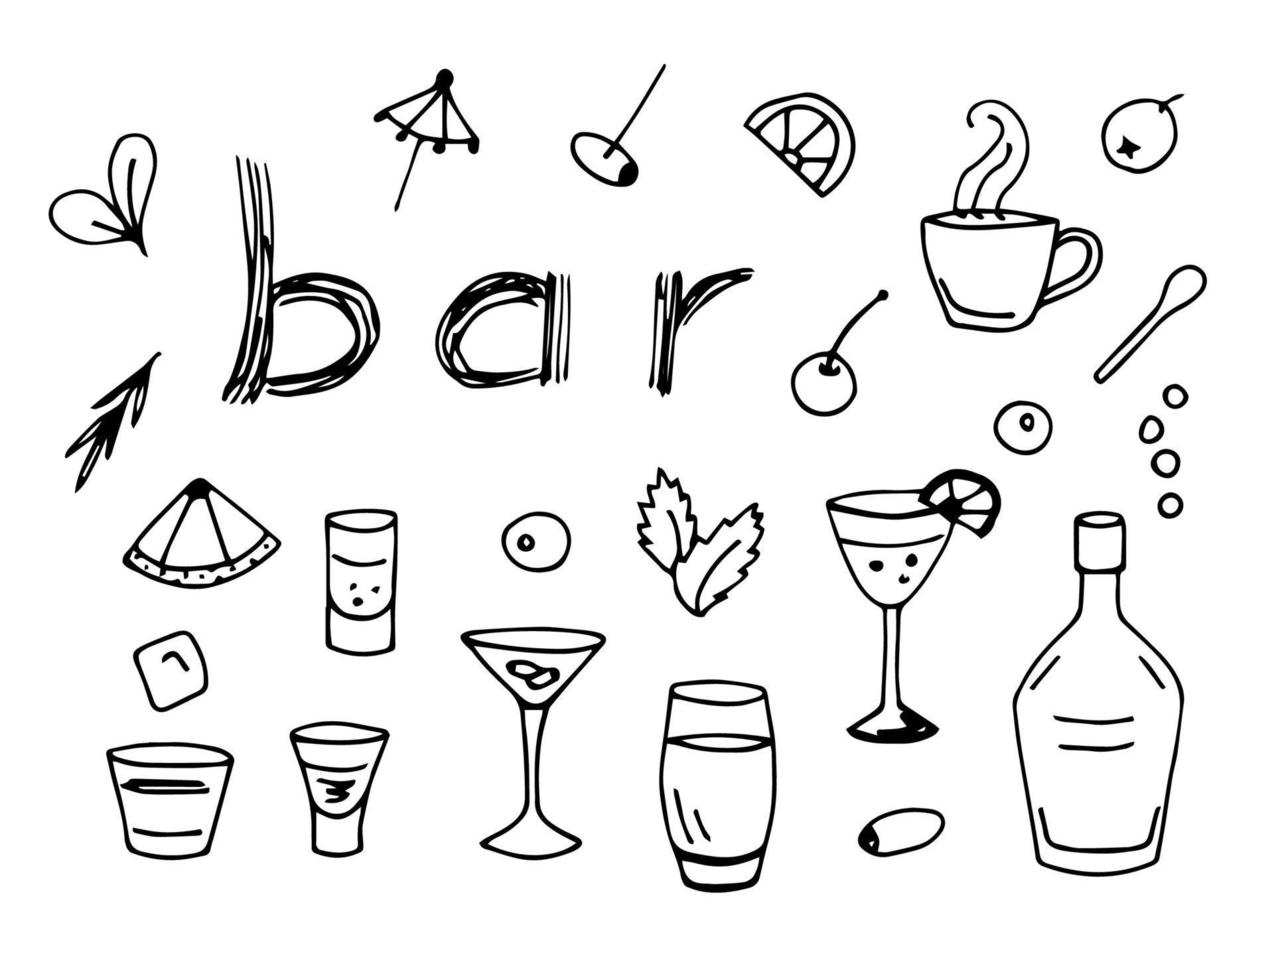 Hand-drawn simple vector doodle sketch. Set of design elements for bar, bottle, glass, drink, cocktail, ice with a black outline on a white background. Summer cafe, drinks.